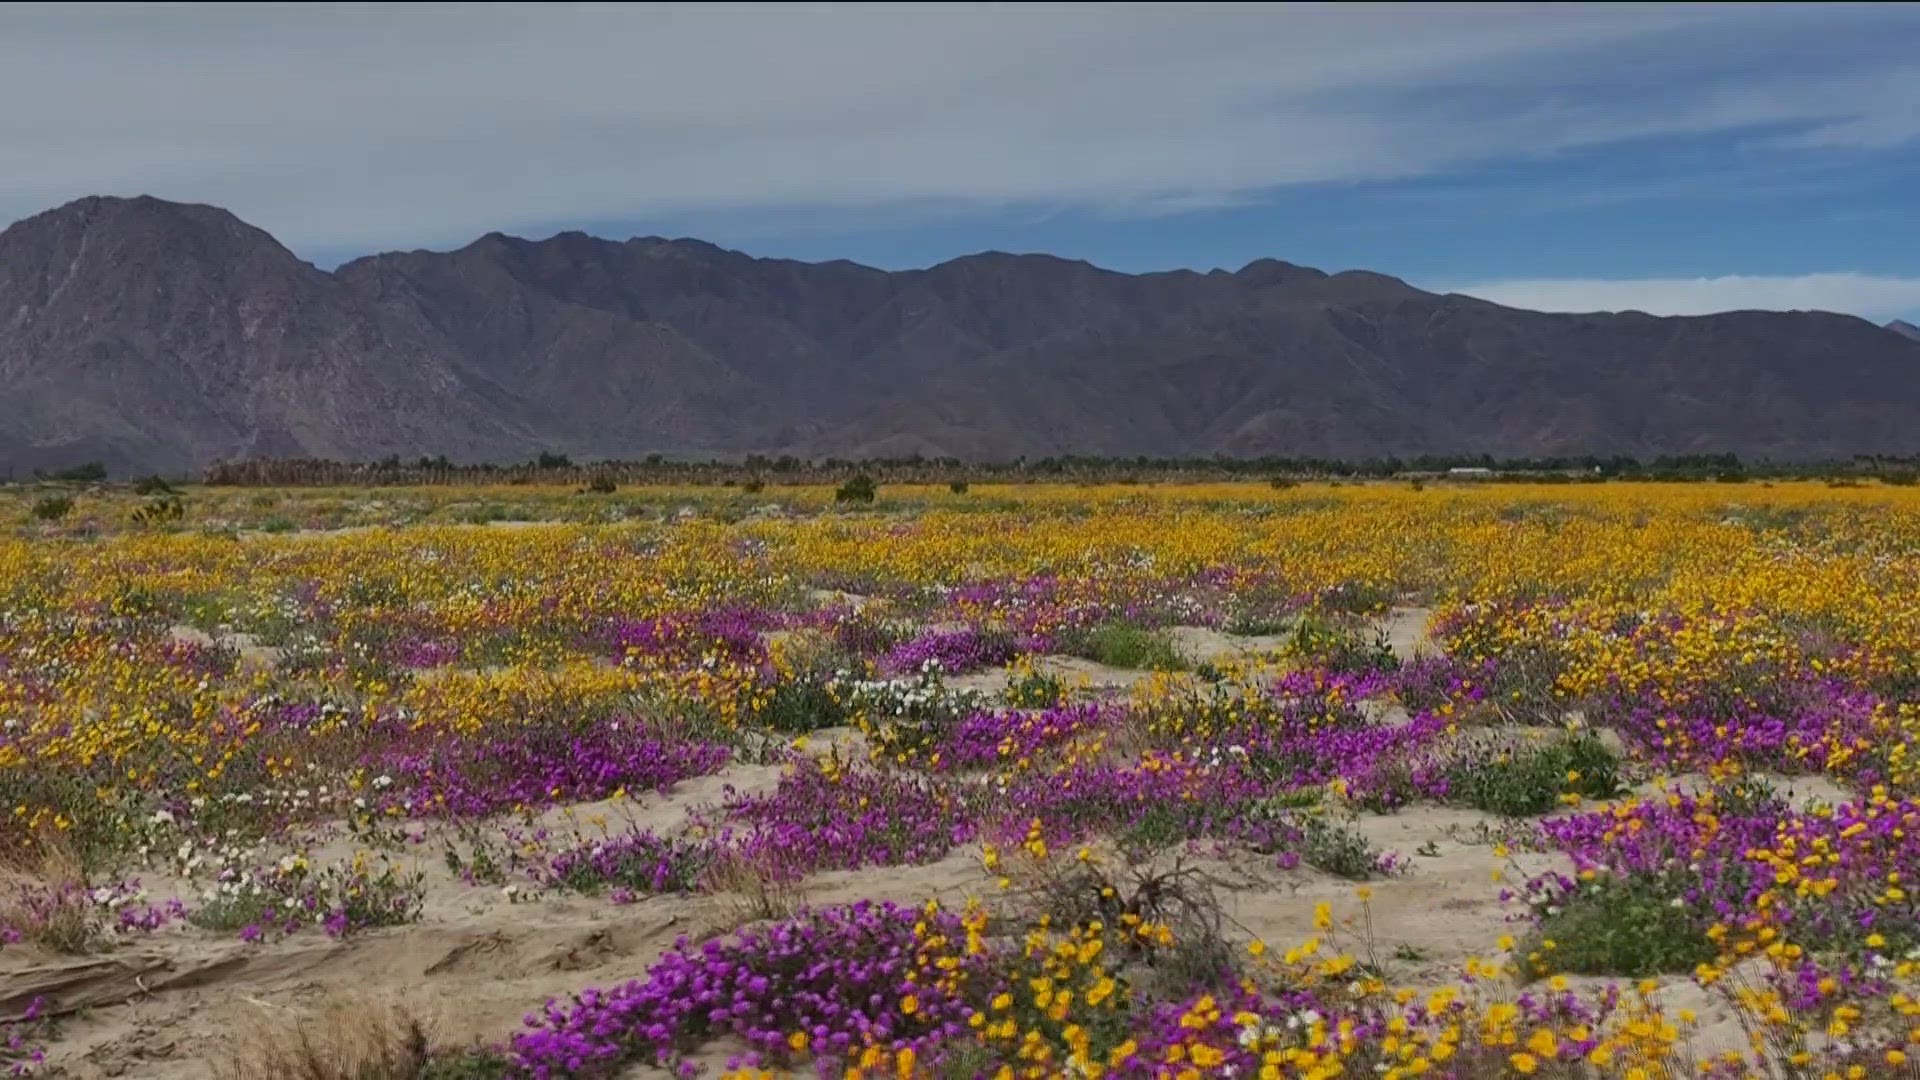 Anza-Borrego Desert State Park is seeing its best bloom in years and it's drawing plenty of visitors to the area.